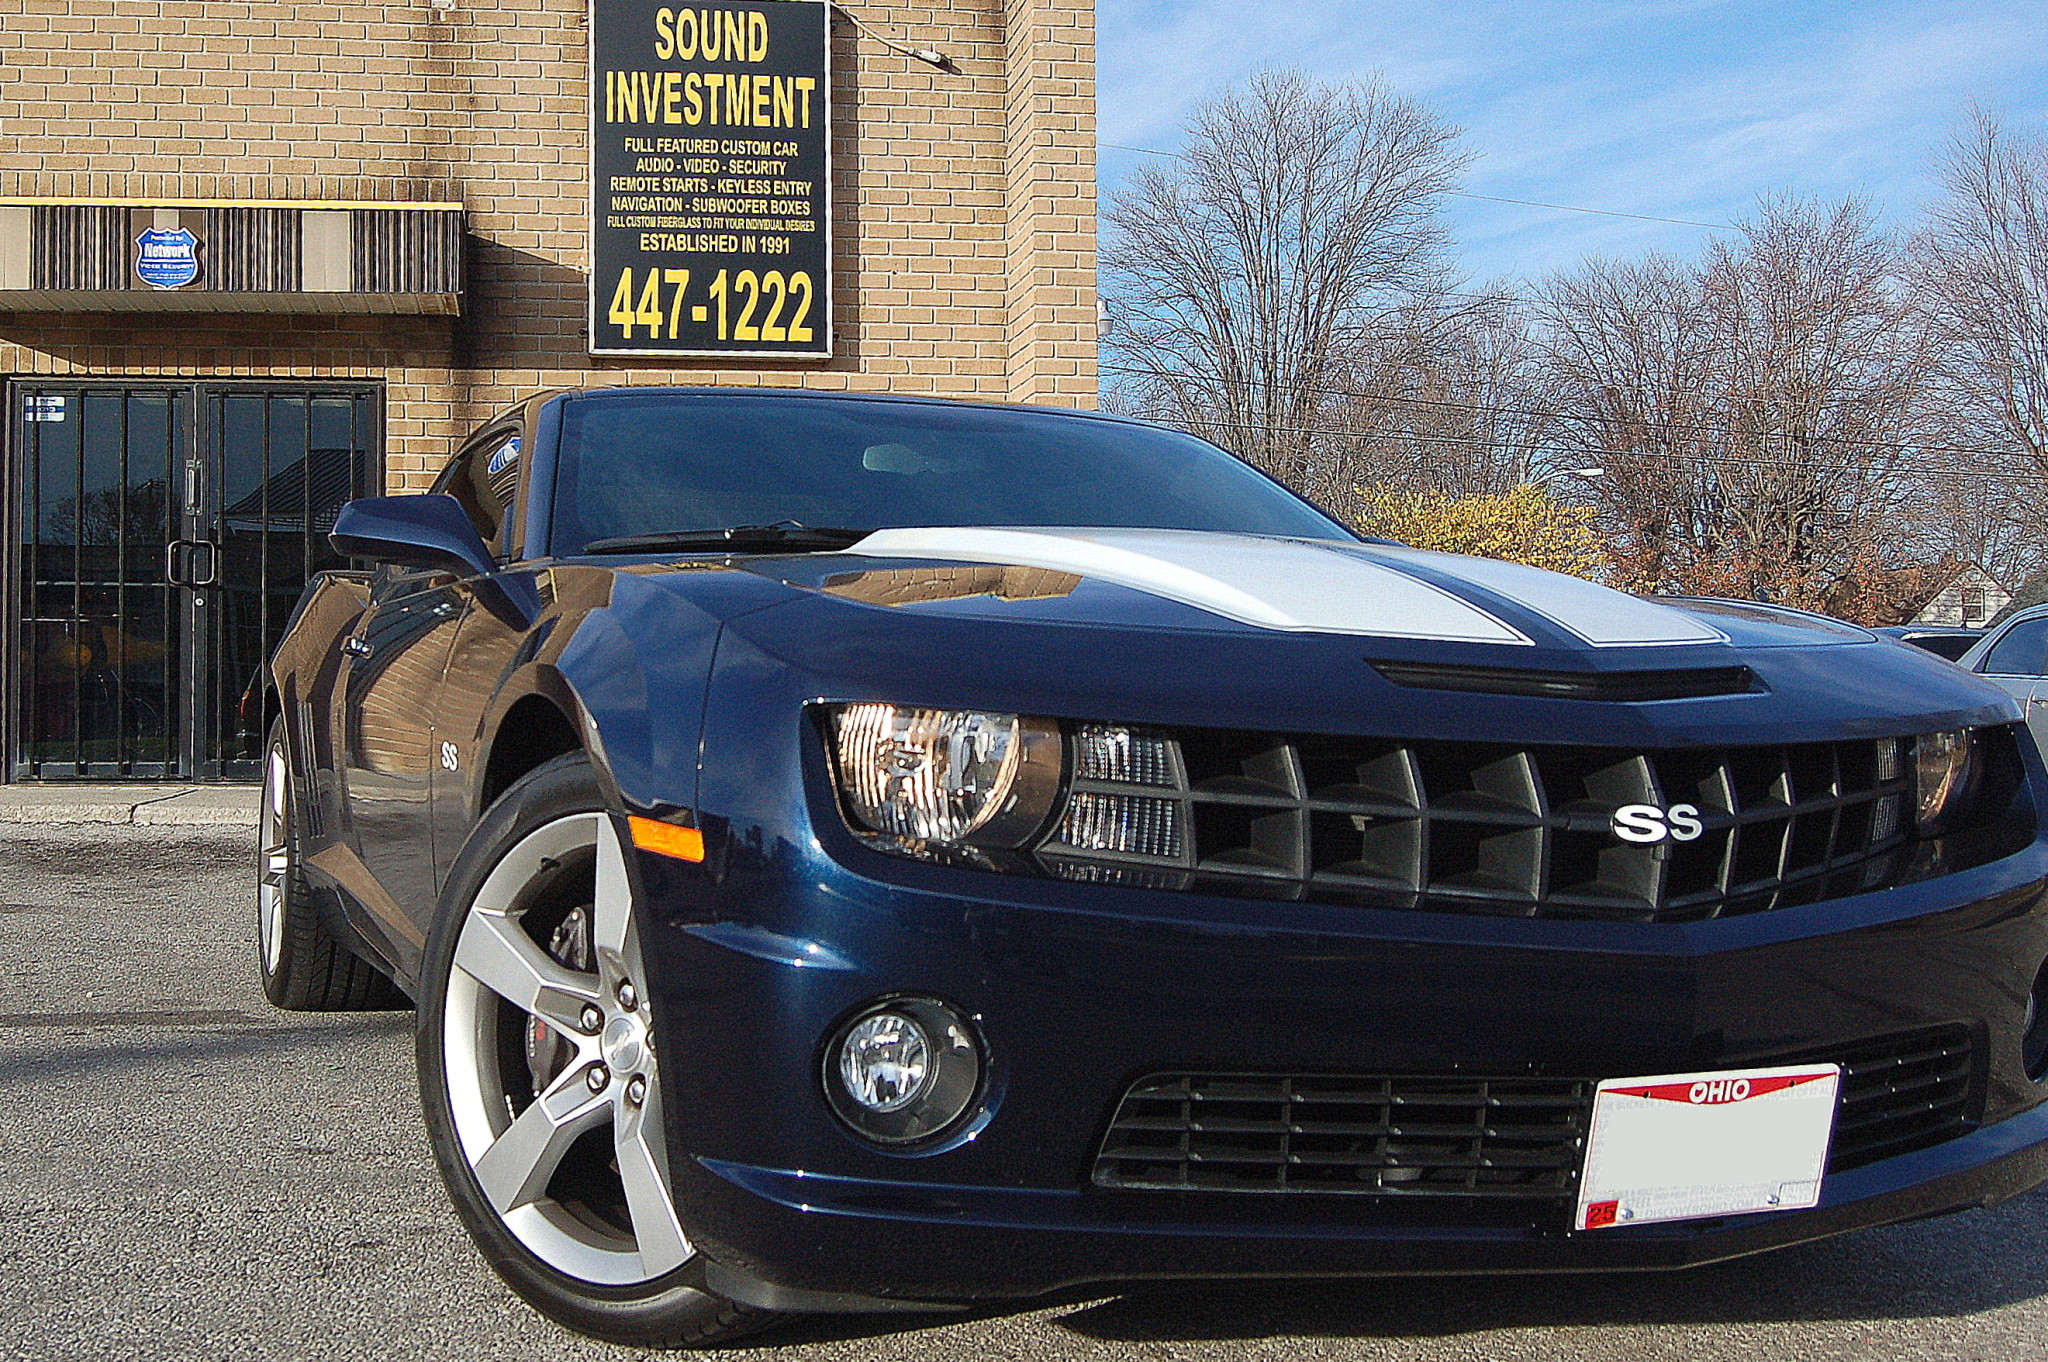 2012 Chevrolet Camaro Ss Heated Leather Seats Sound Investment